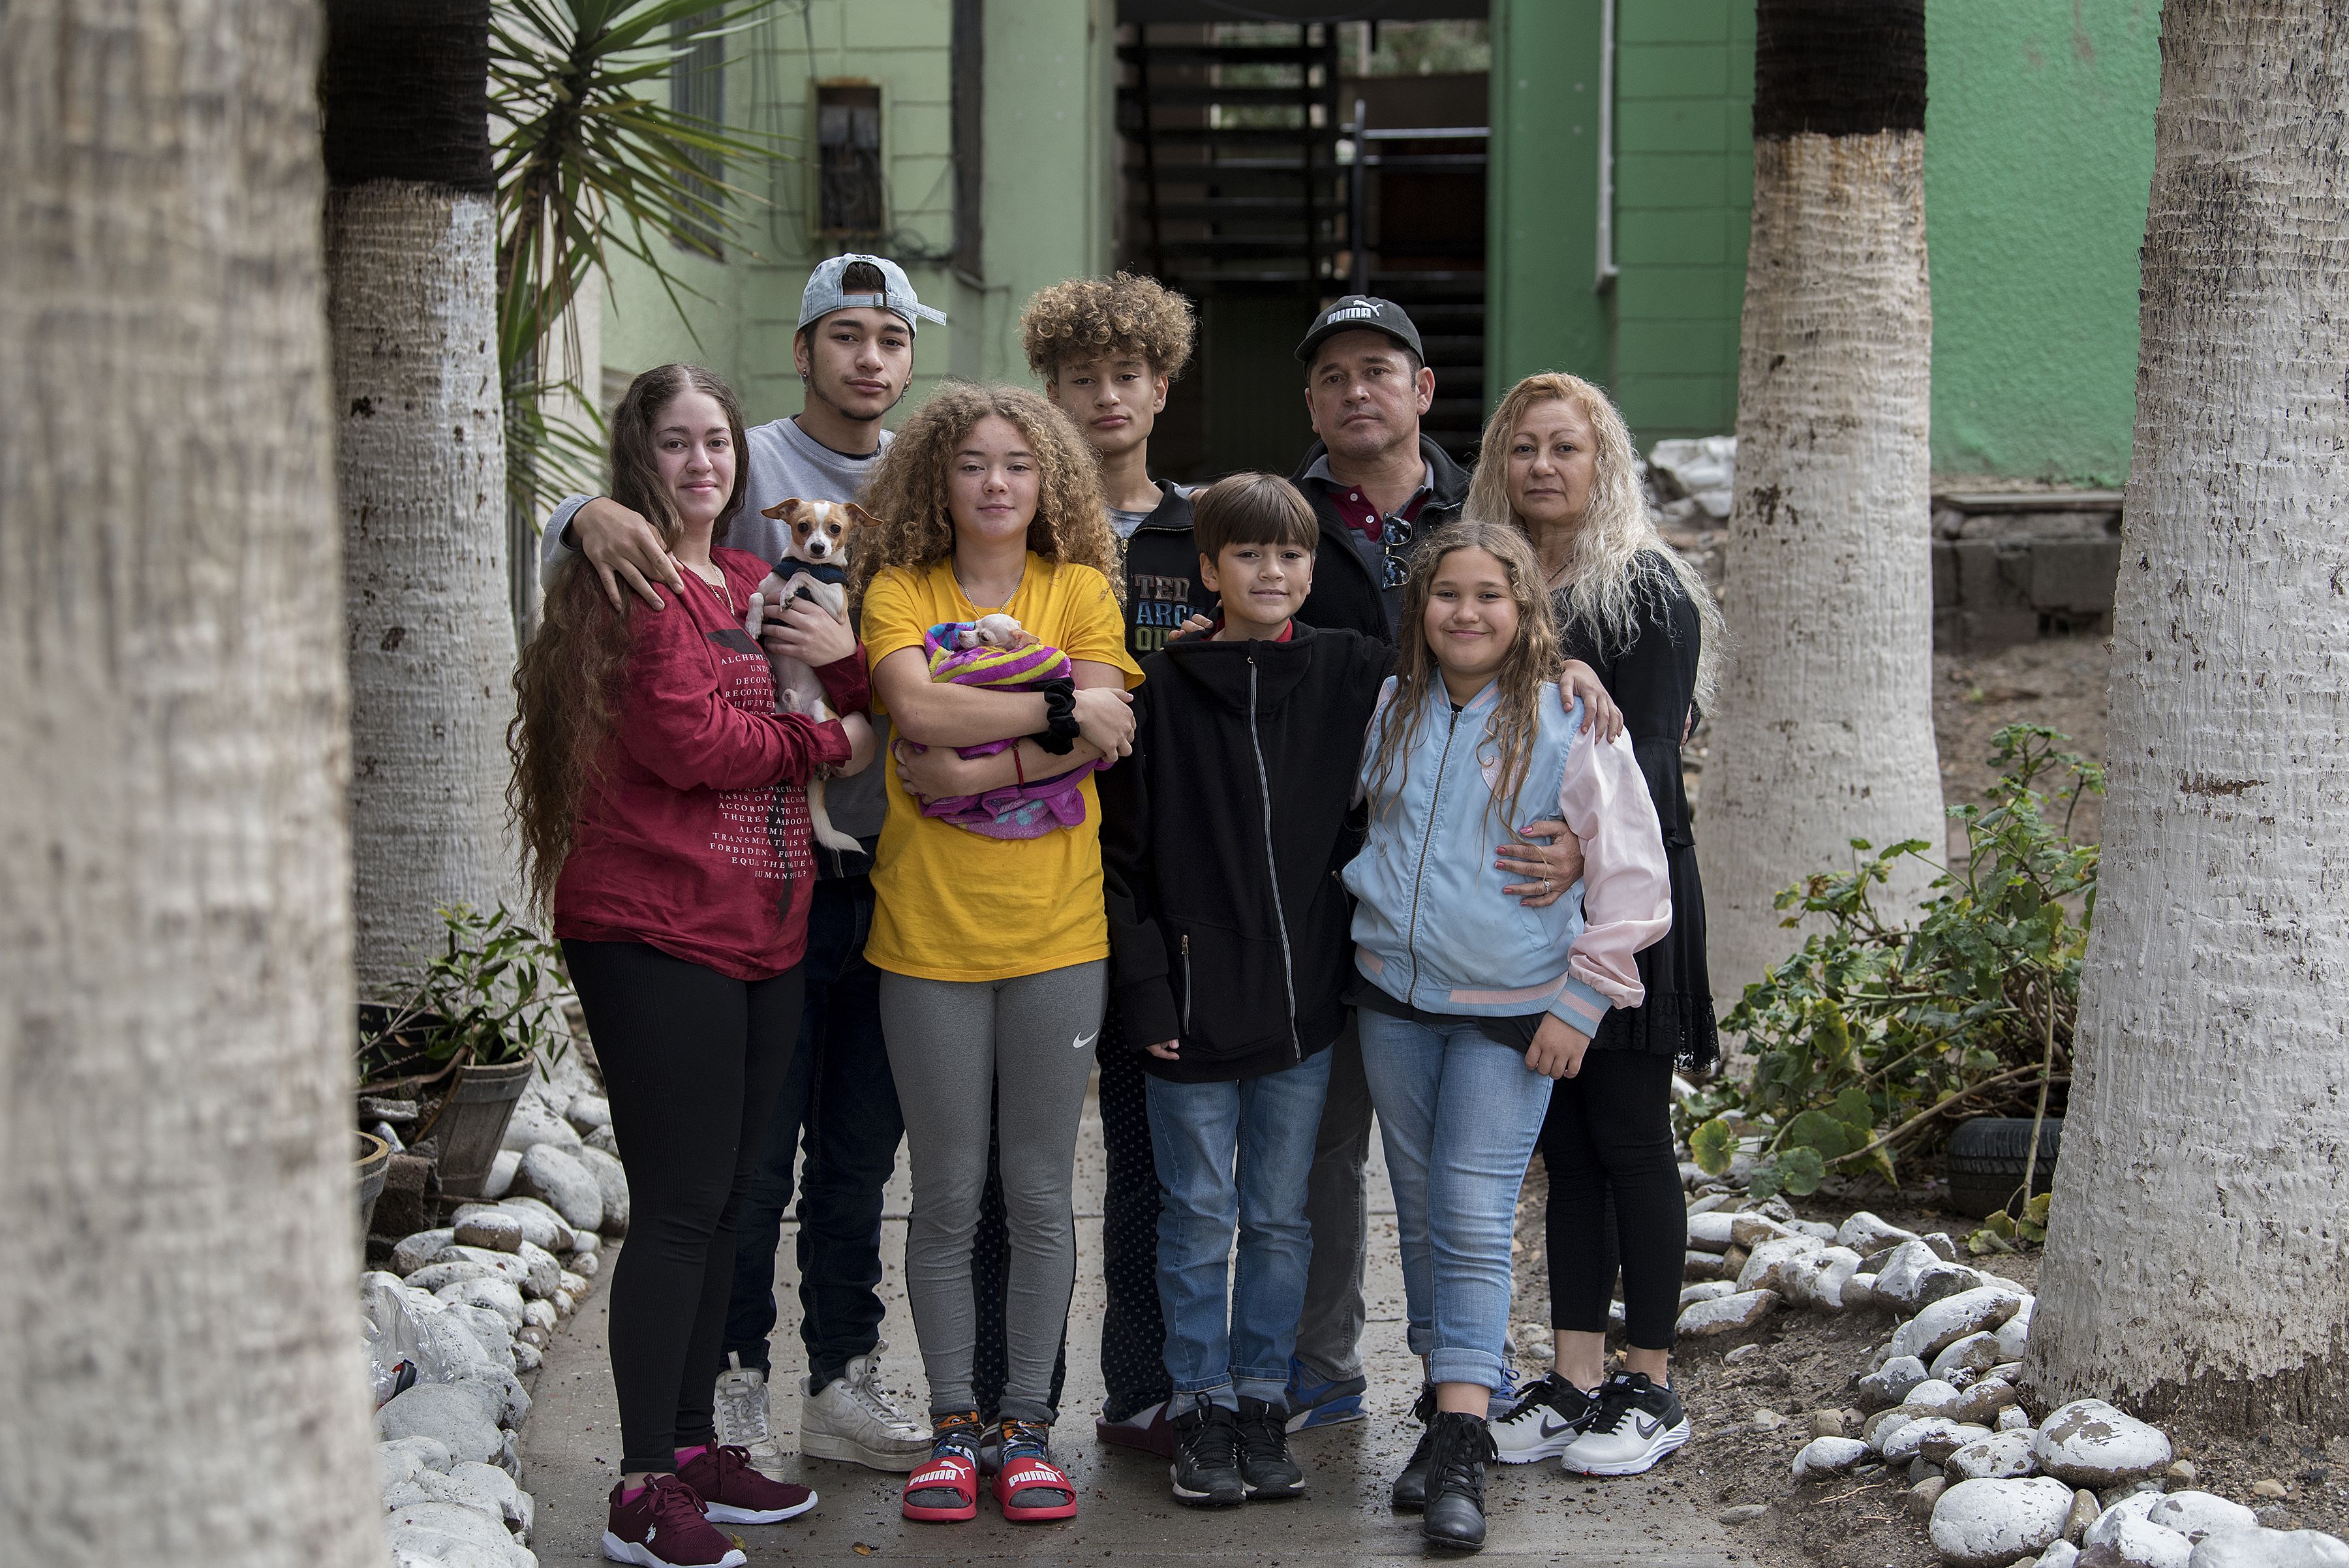 The Flores family pauses for a portrait outside Ramon’s apartment complex in Tijuana, Mexico. Family members are, clockwise from left, Leslie, 23, Lennes, 18, Raymond, 15, Ramon, 46, Enedis, 54, Rayma, 10, Edward, 12, and Kennedy, 16. The dogs are Canelo, left, and Bambi, wrapped in the blanket. Image by Amanda Cowan. Mexico, 2019.